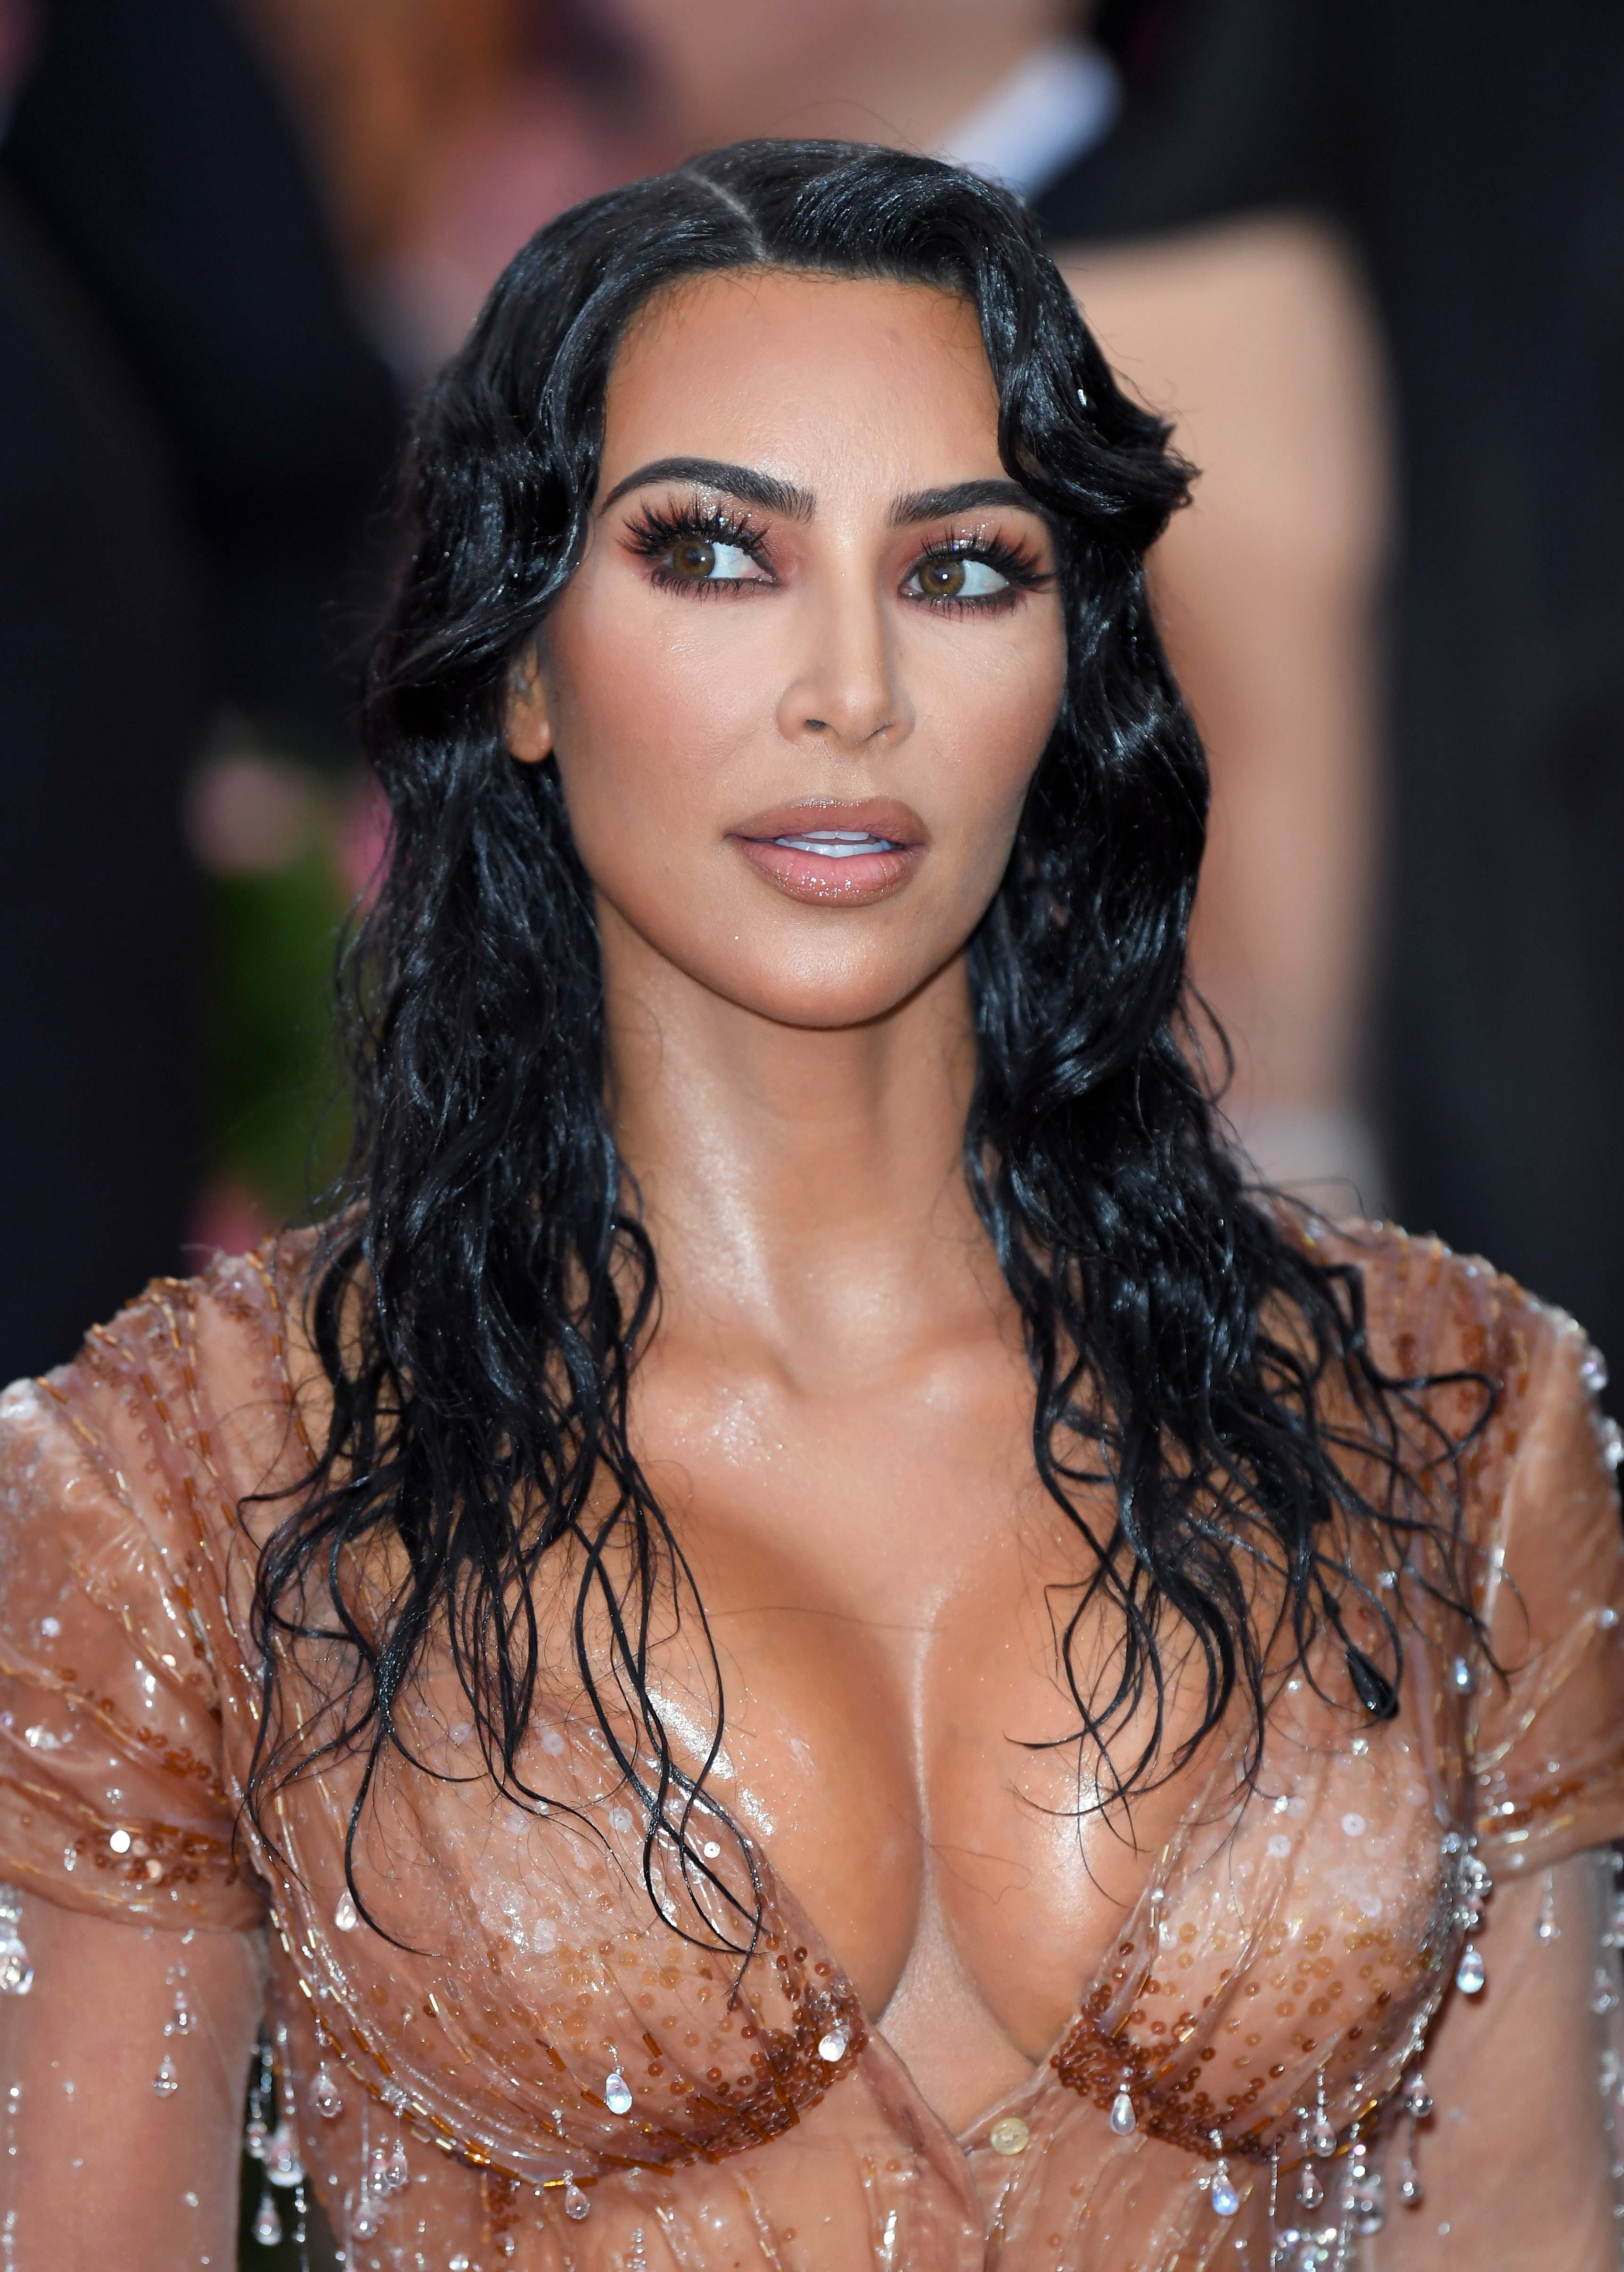 Kim Kardashian West arrives for the 2019 Met Gala at The Metropolitan Museum of Art on May 6, 2019 in New York City. | Source: Getty Images